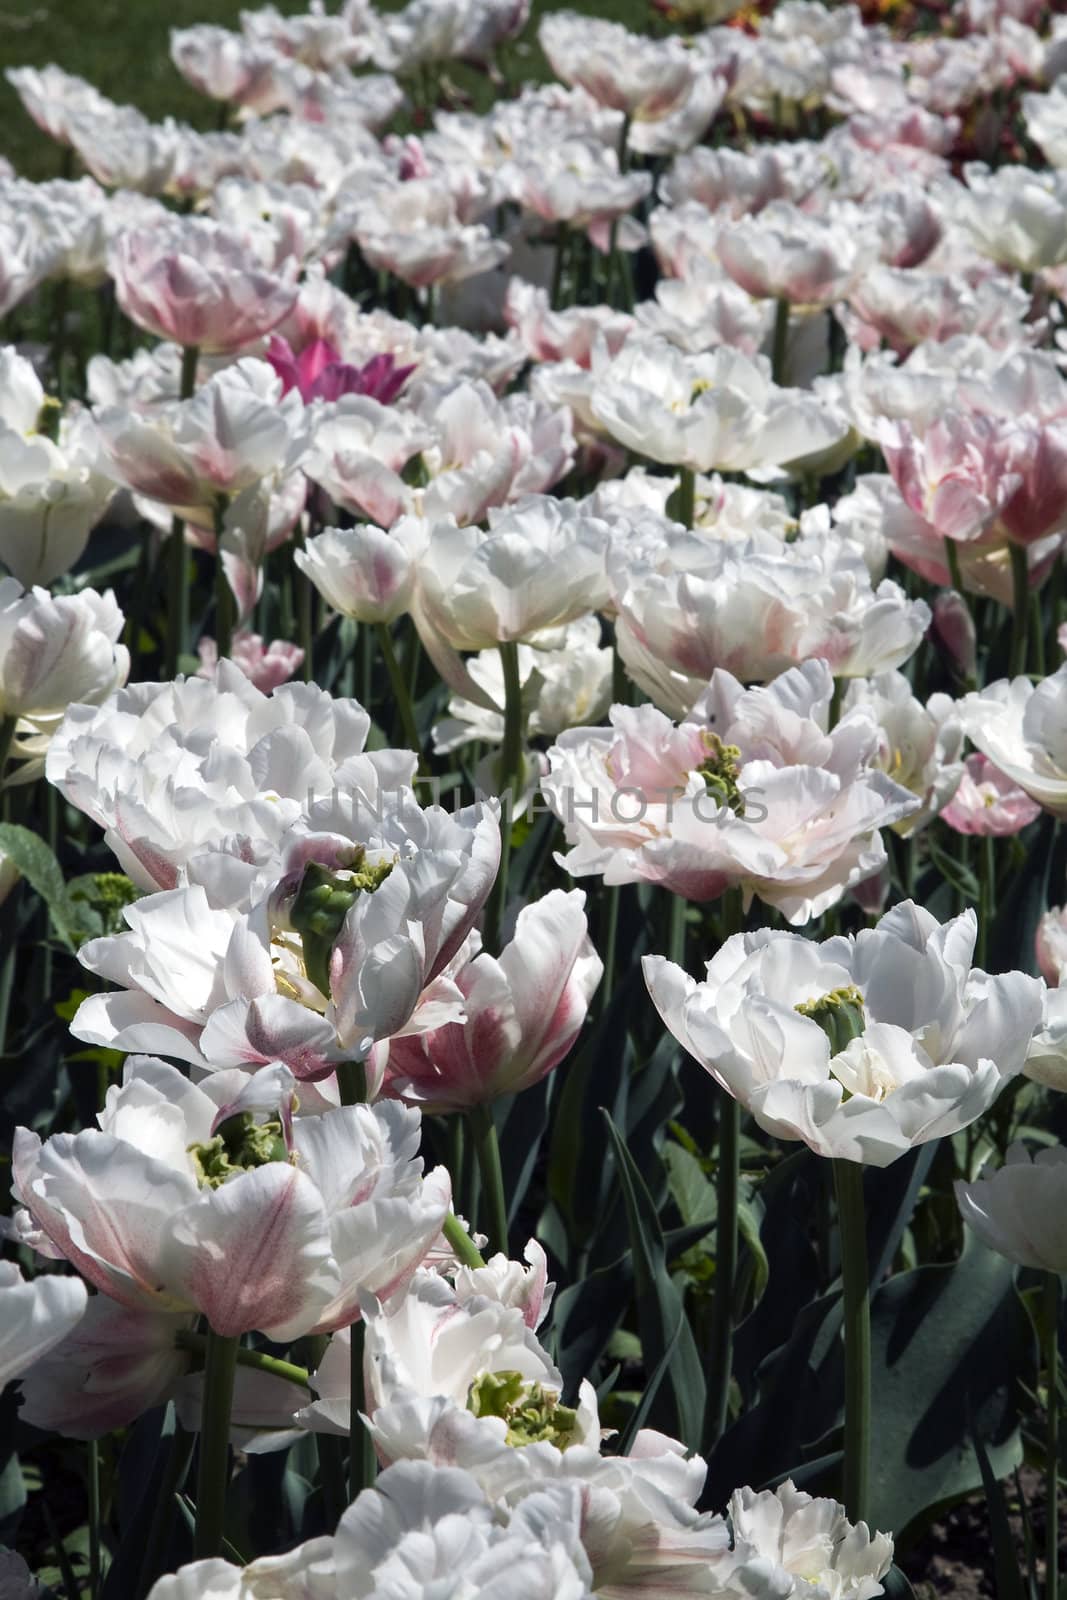 A bed of Double early tulips in a park